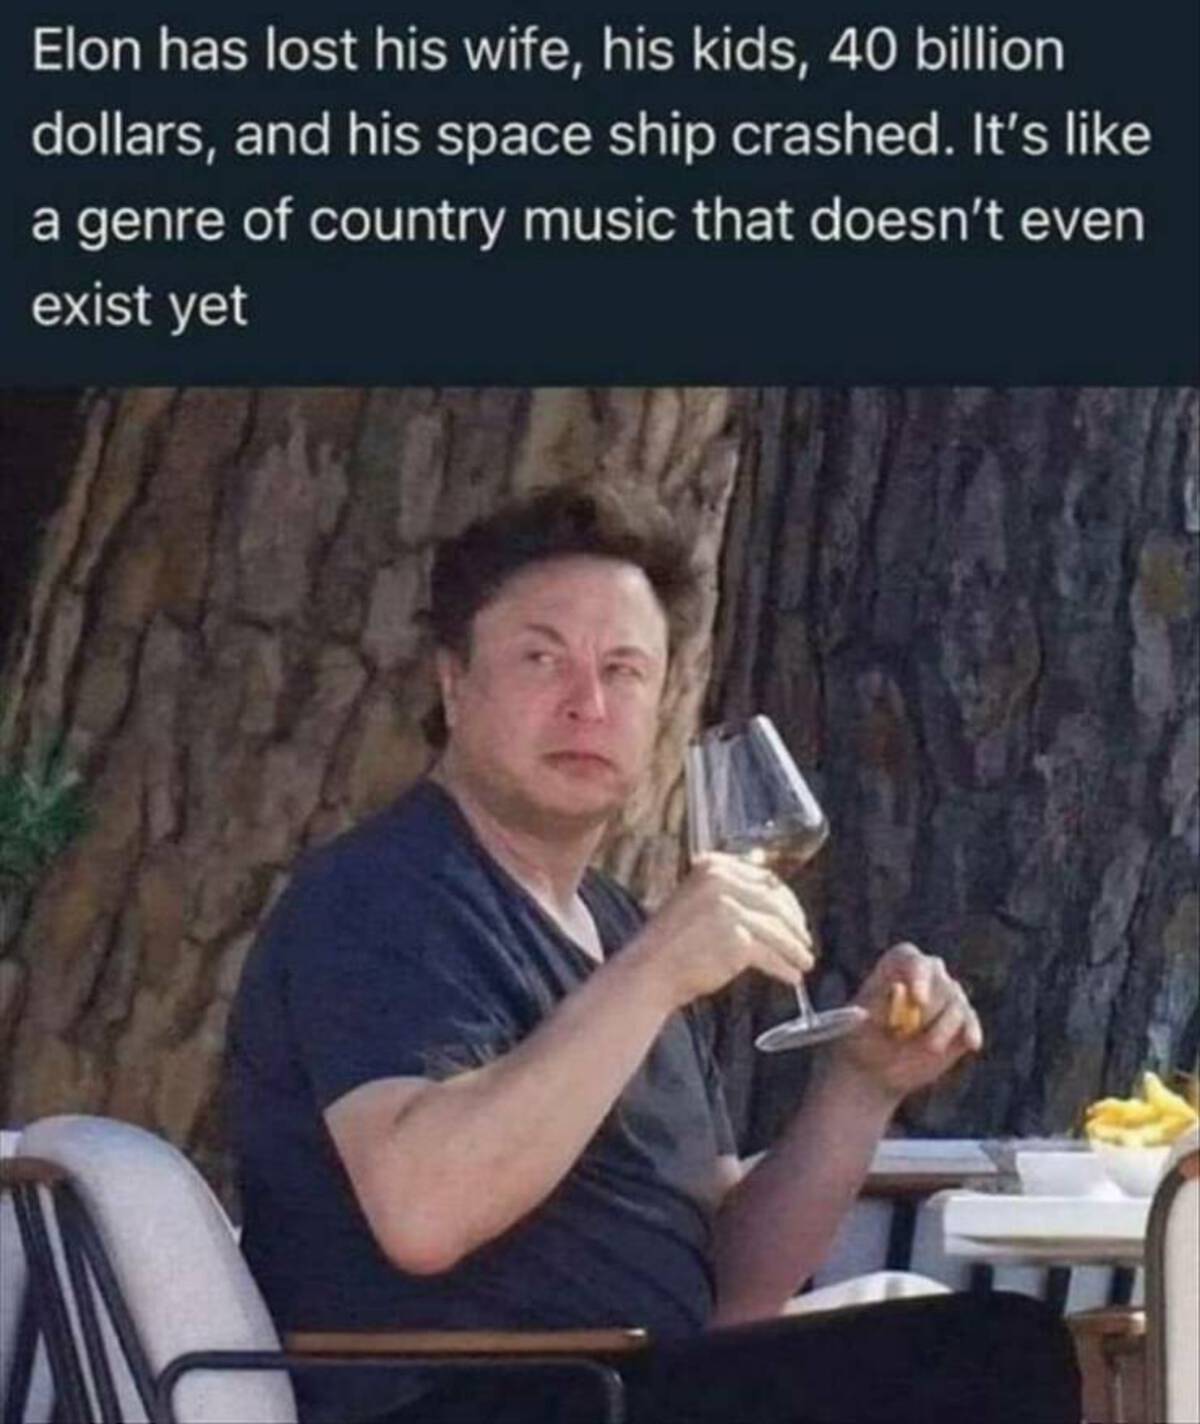 photo caption - Elon has lost his wife, his kids, 40 billion dollars, and his space ship crashed. It's a genre of country music that doesn't even exist yet